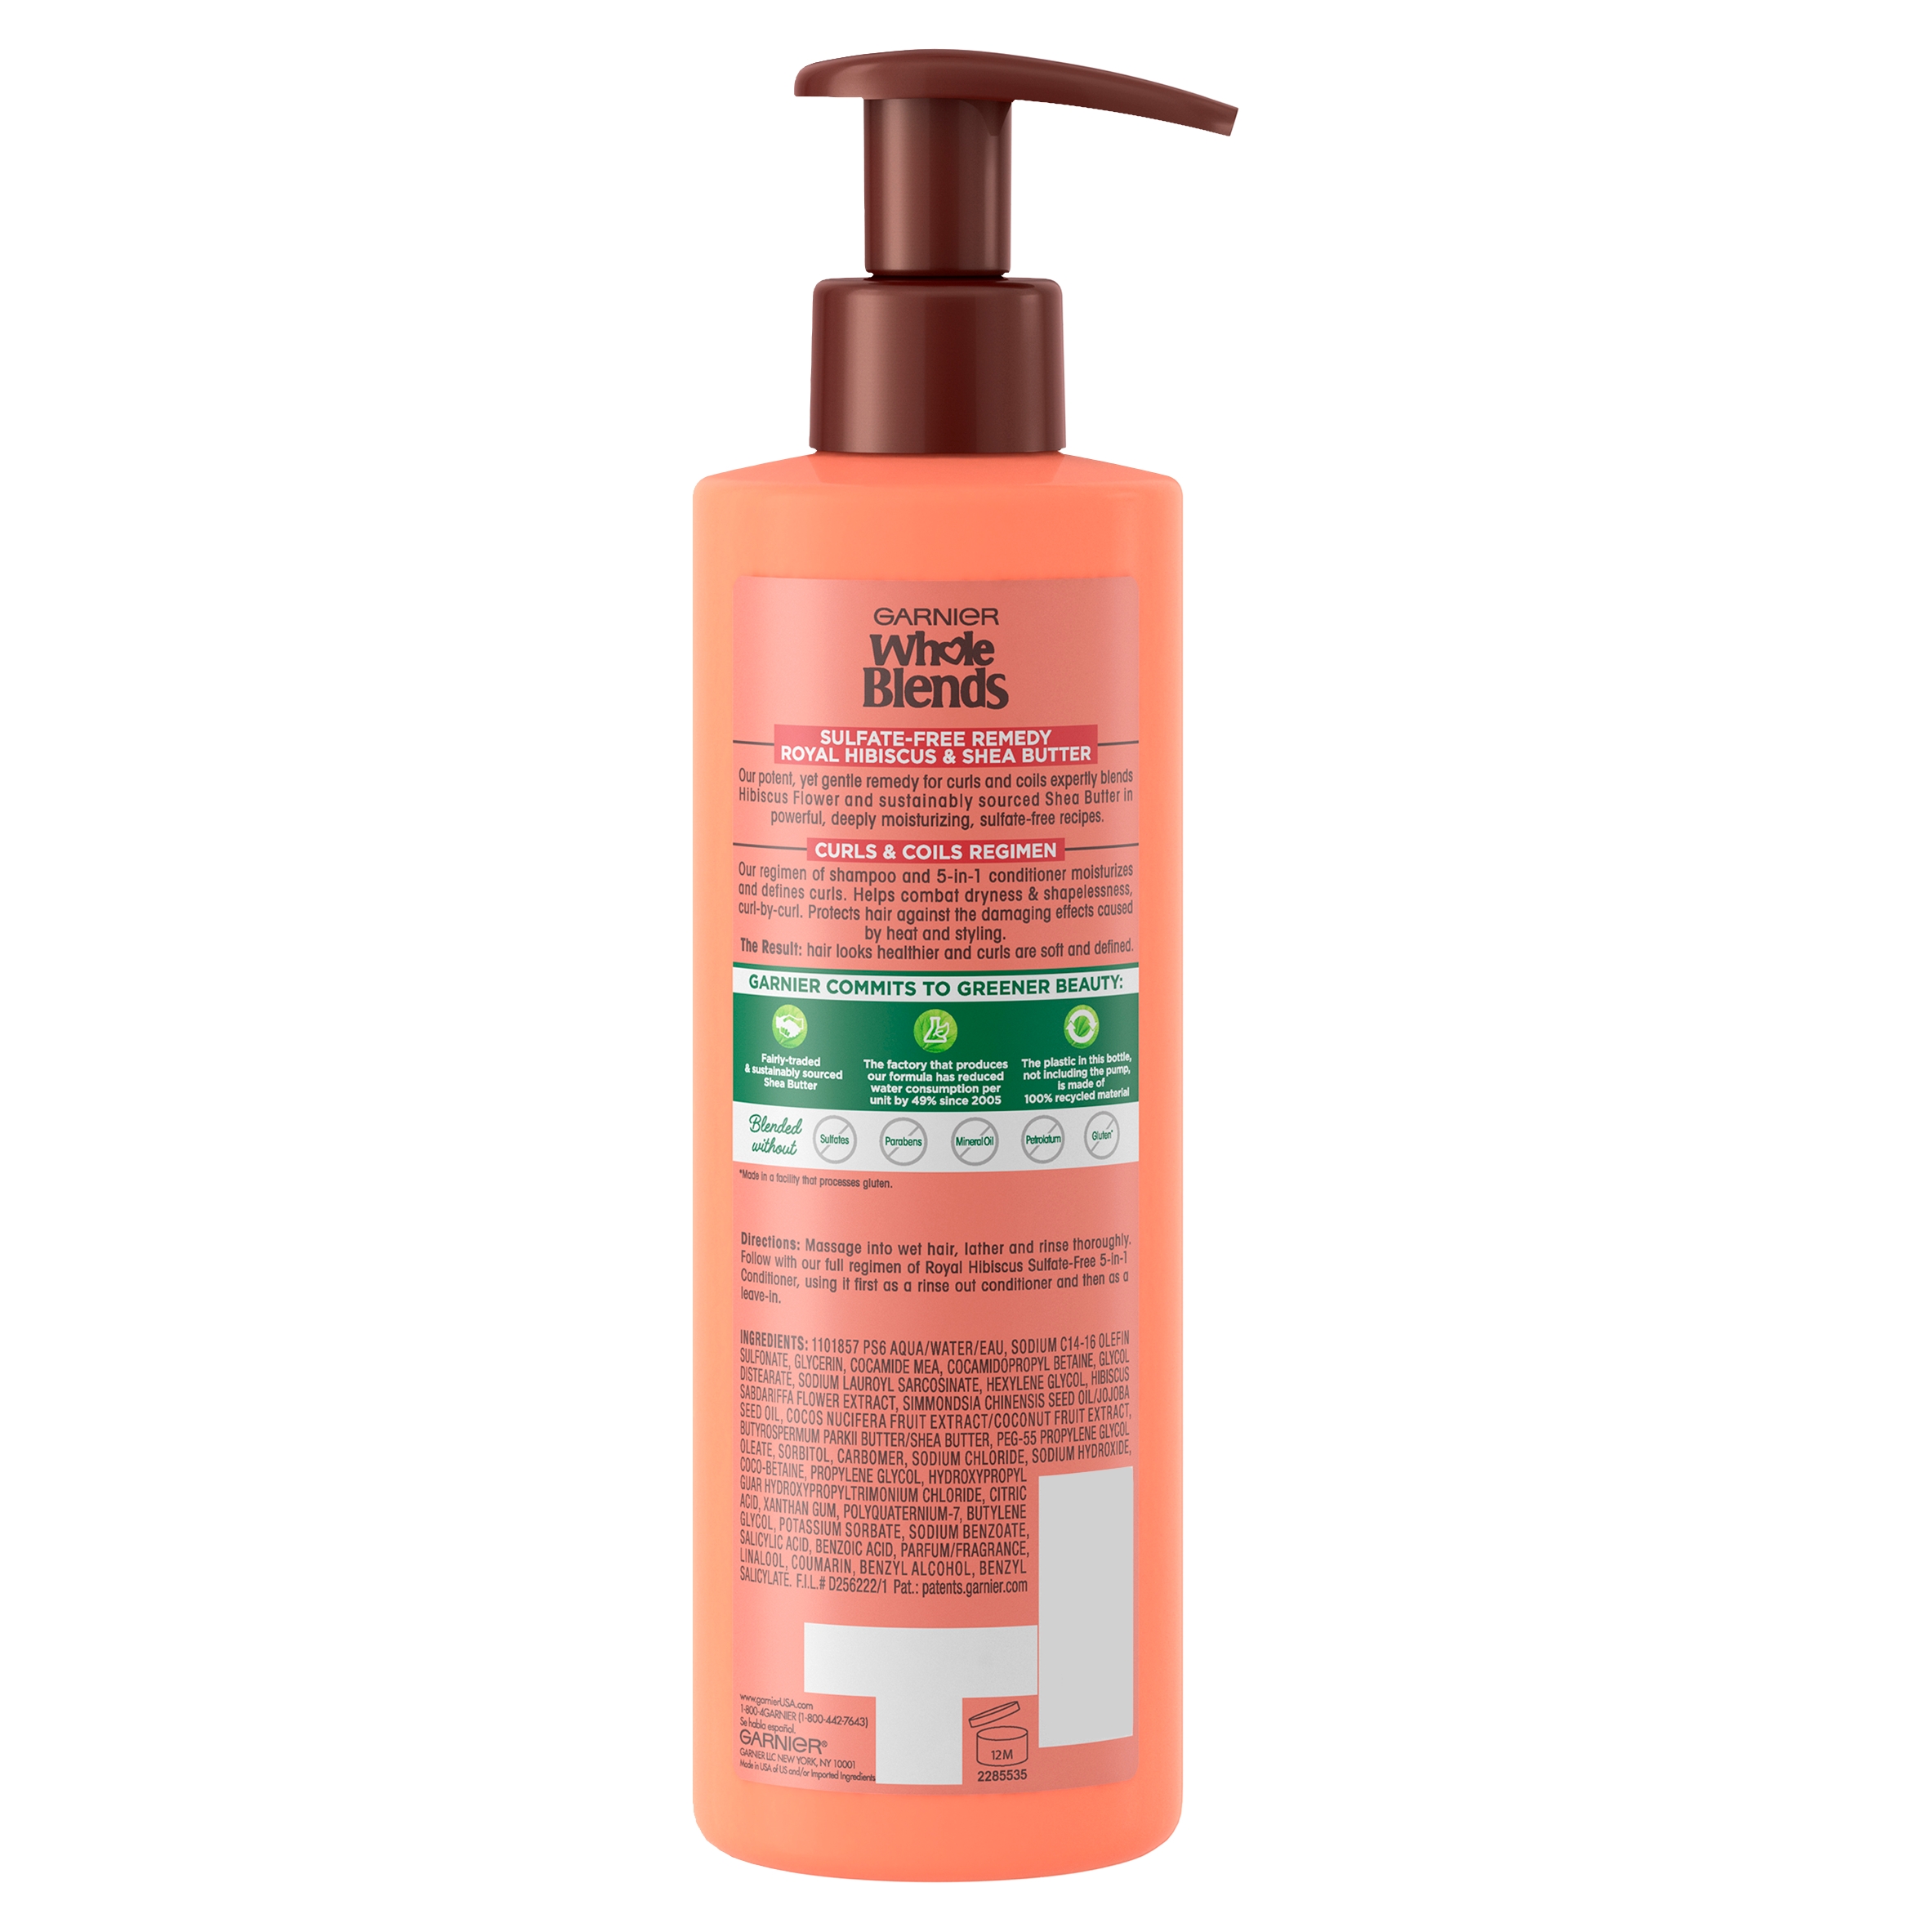 Garnier Whole Blends Curl Care Shampoo with Royal Hibiscus and Shea Butter, 12 fl oz - image 3 of 13